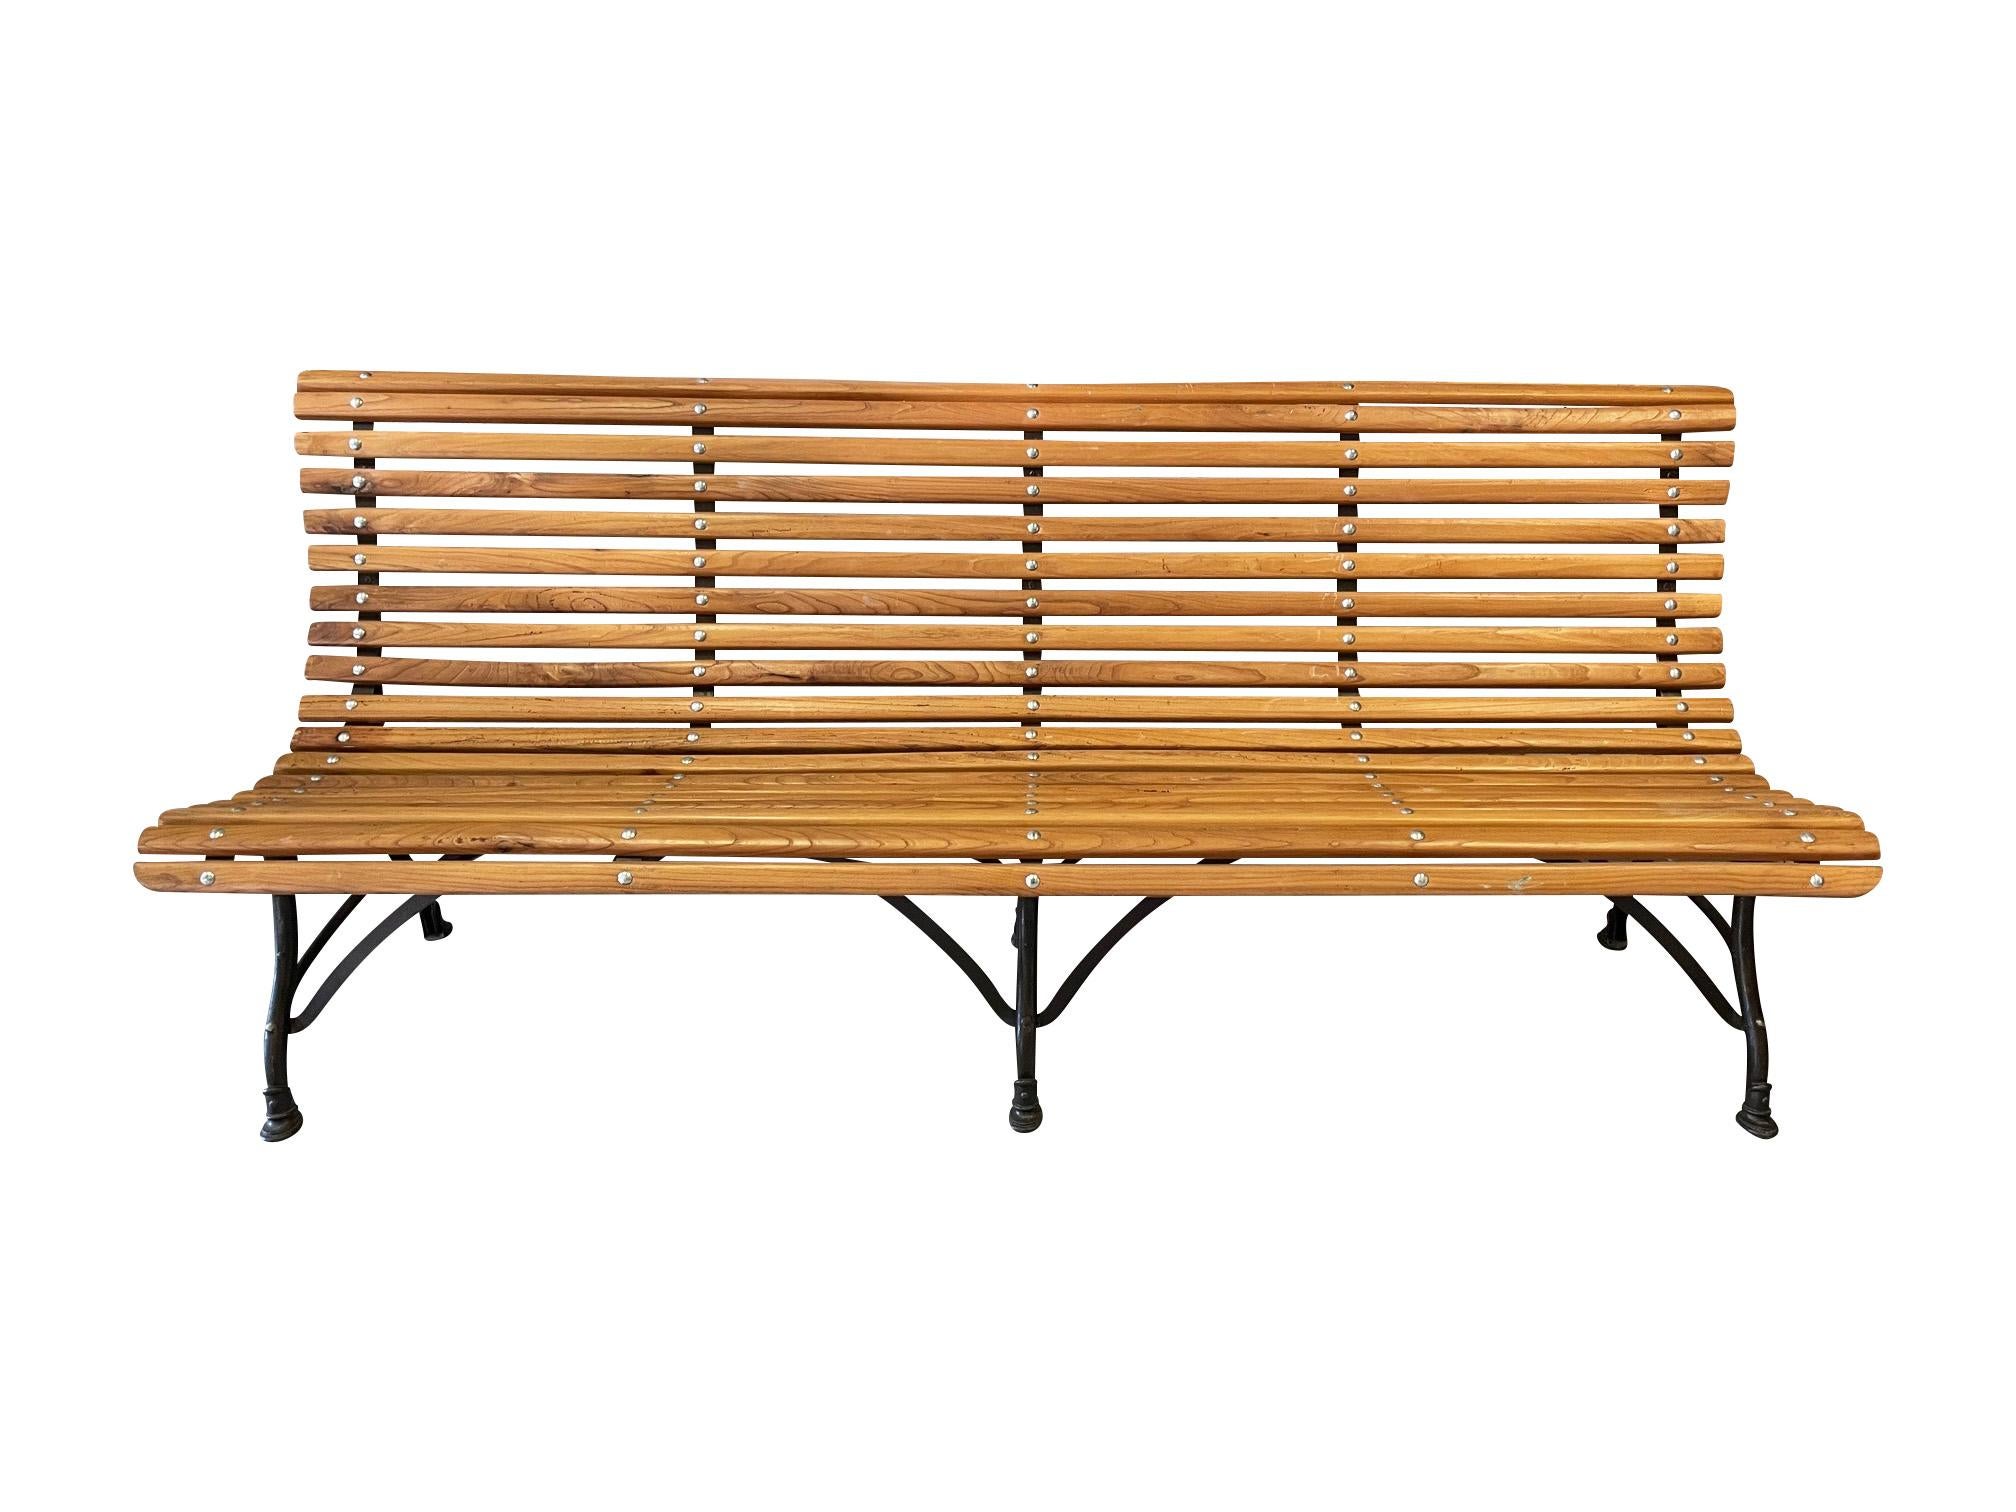 A large Arras wrought iron and timber garden bench, circa 1900.

Refurbished with reclaimed elm slats, a very comfortable and stylish bench from the famous Arras Foundry in Northern France which operated throughout the 19th century, until the